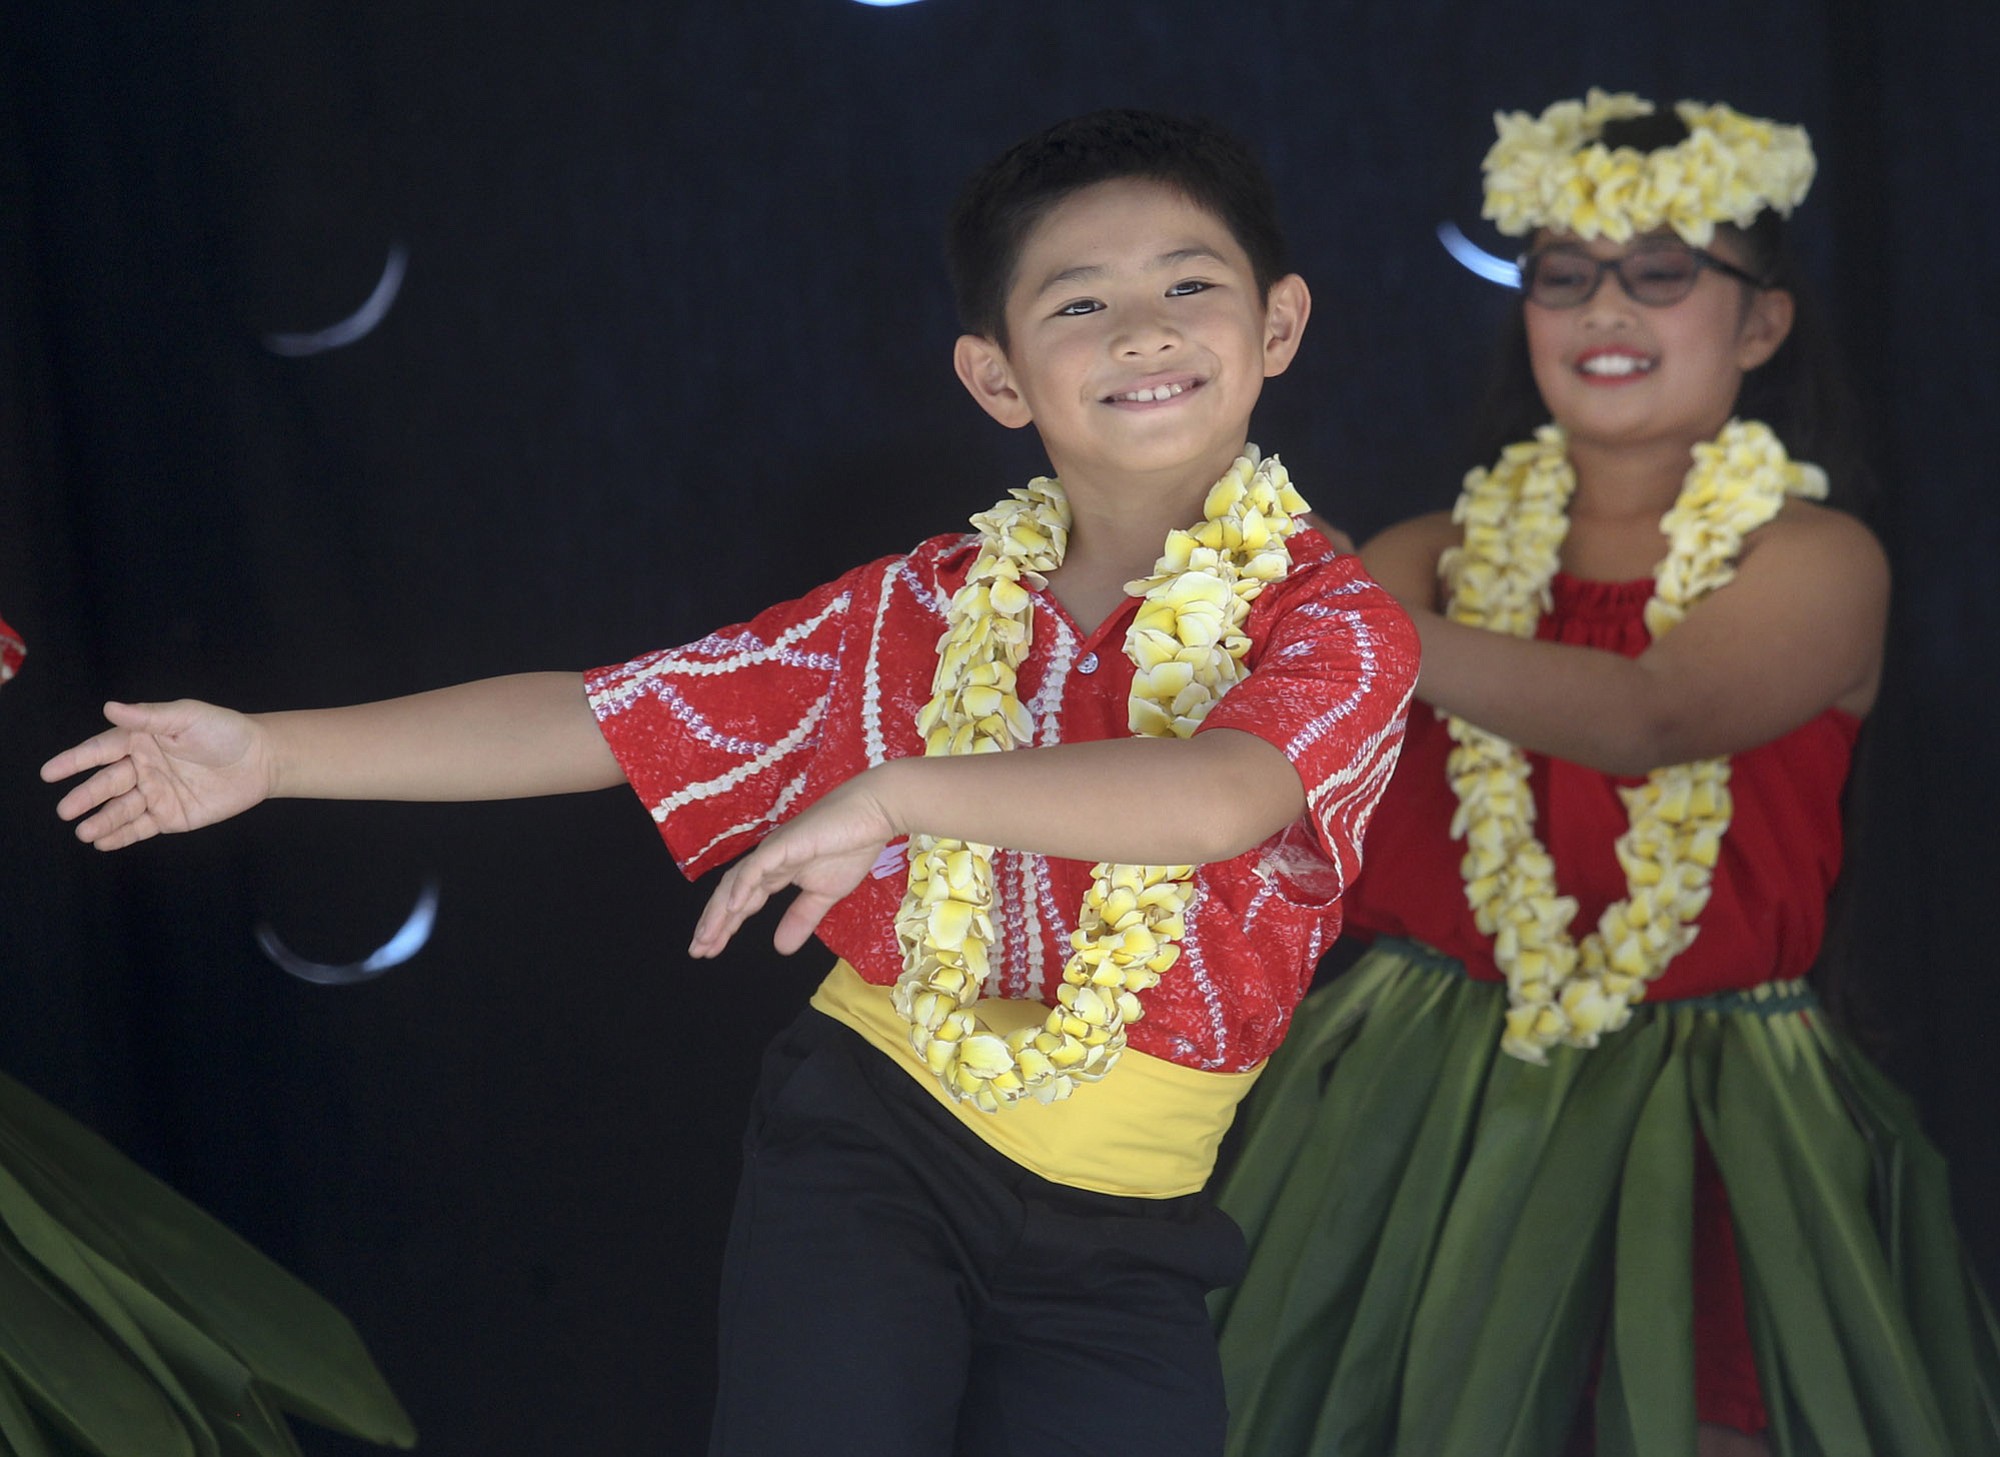 Children perform traditional Hawaiian dances at the Hou2019ike and Hawaiian Festival in downtown Vancouveru2019s Esther Short Park Saturday.